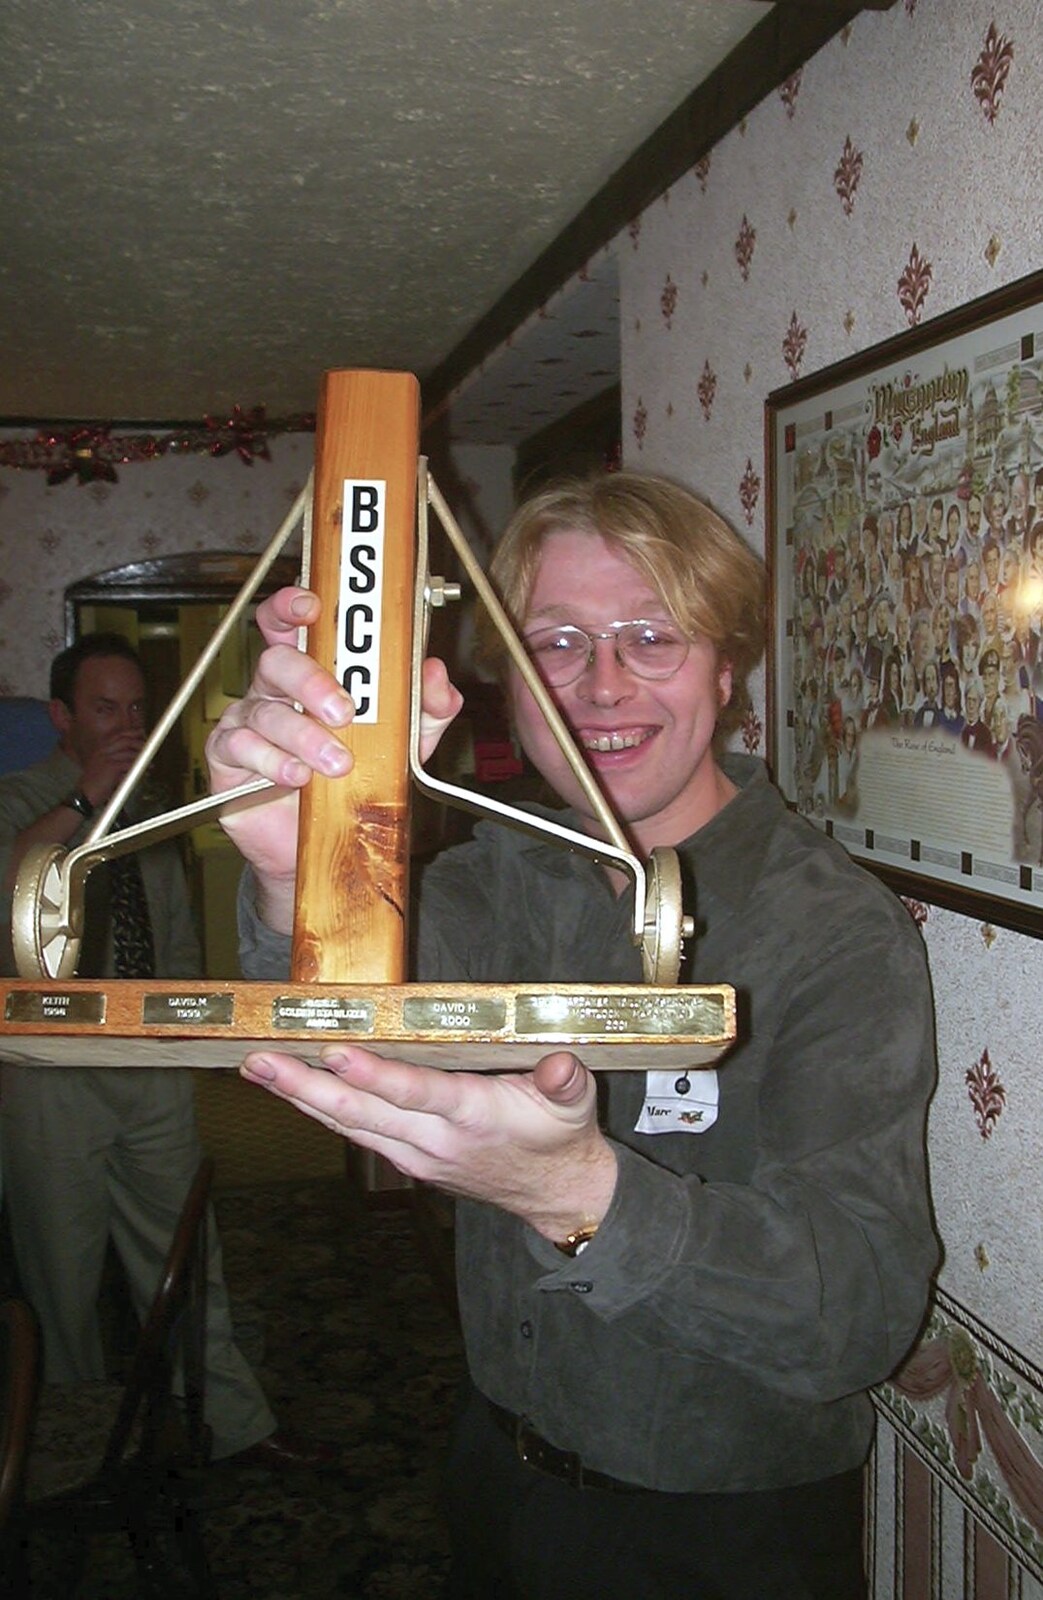 Marc is also a stabiliser winner from The BSCC Christmas Dinner, Brome Swan, Suffolk - 7th December 2001